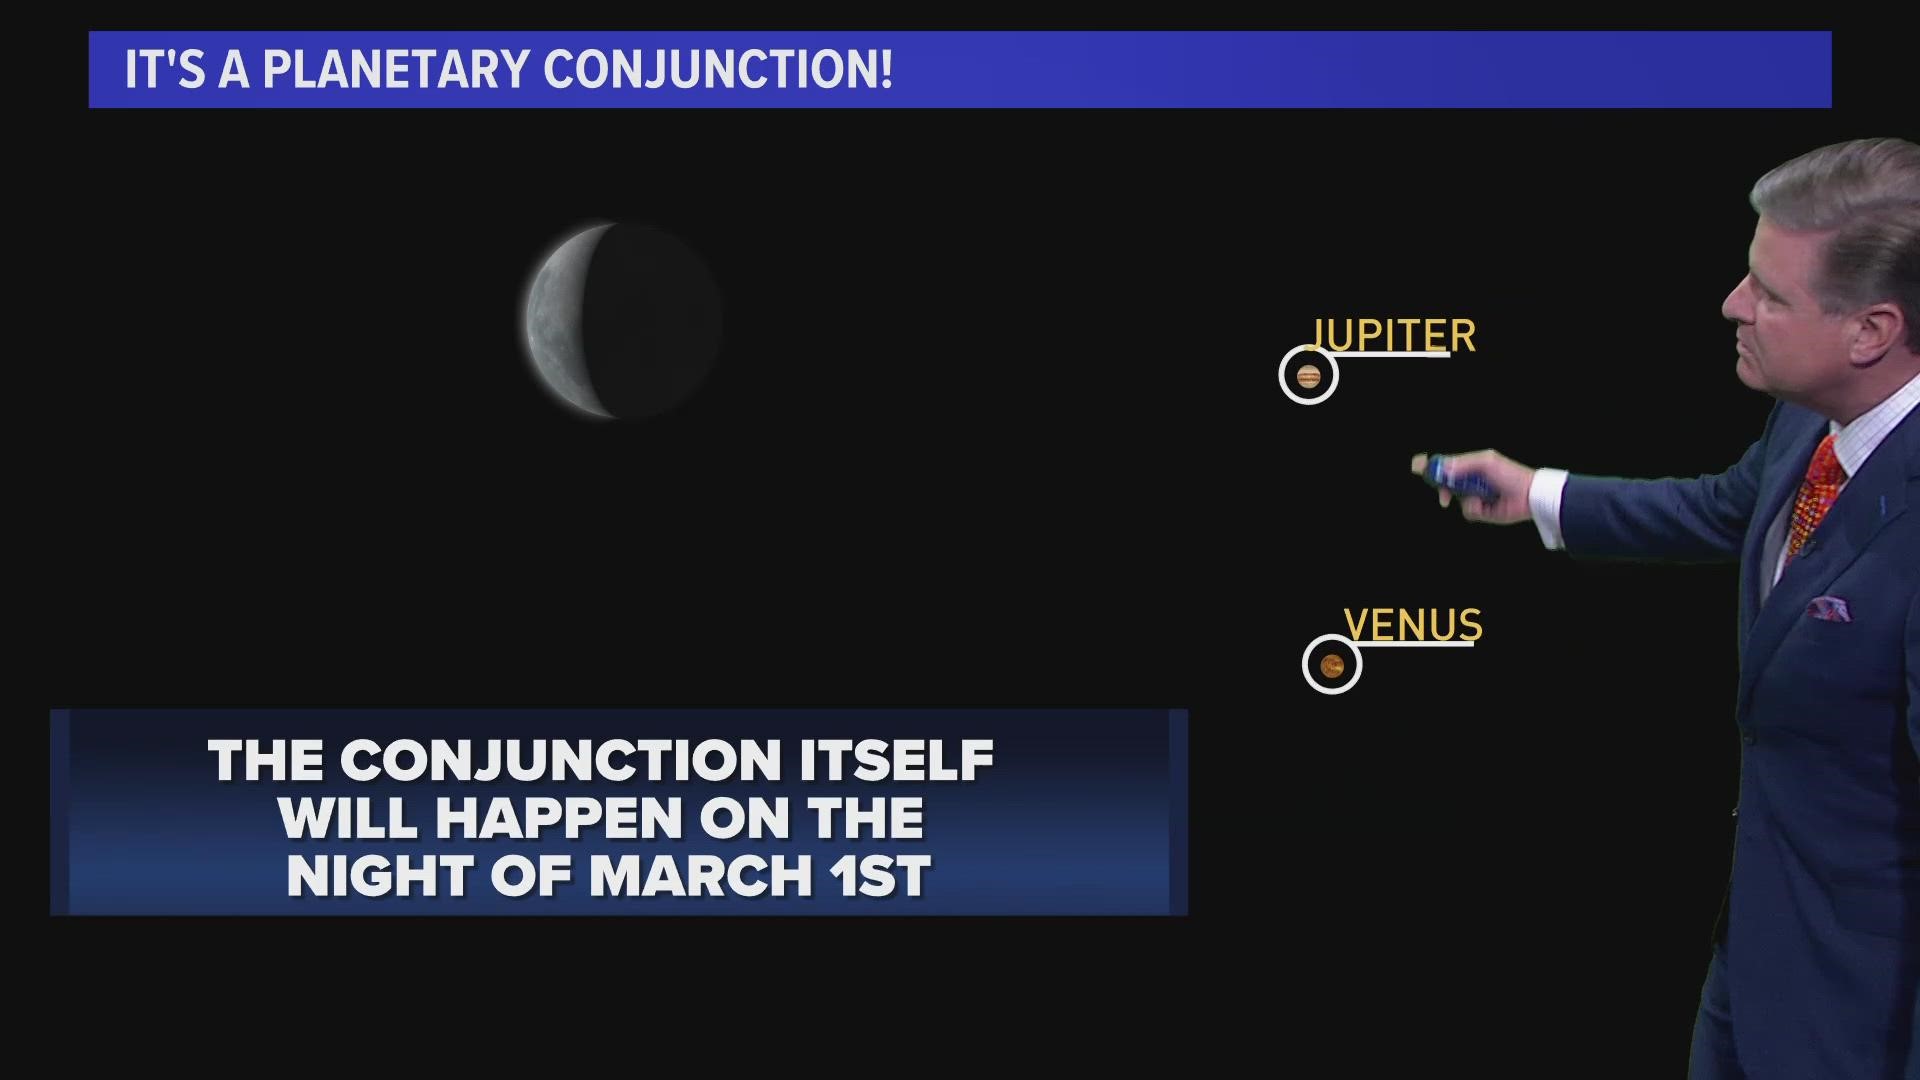 North Texans will soon witness a planetary conjunction. Here's what that means.